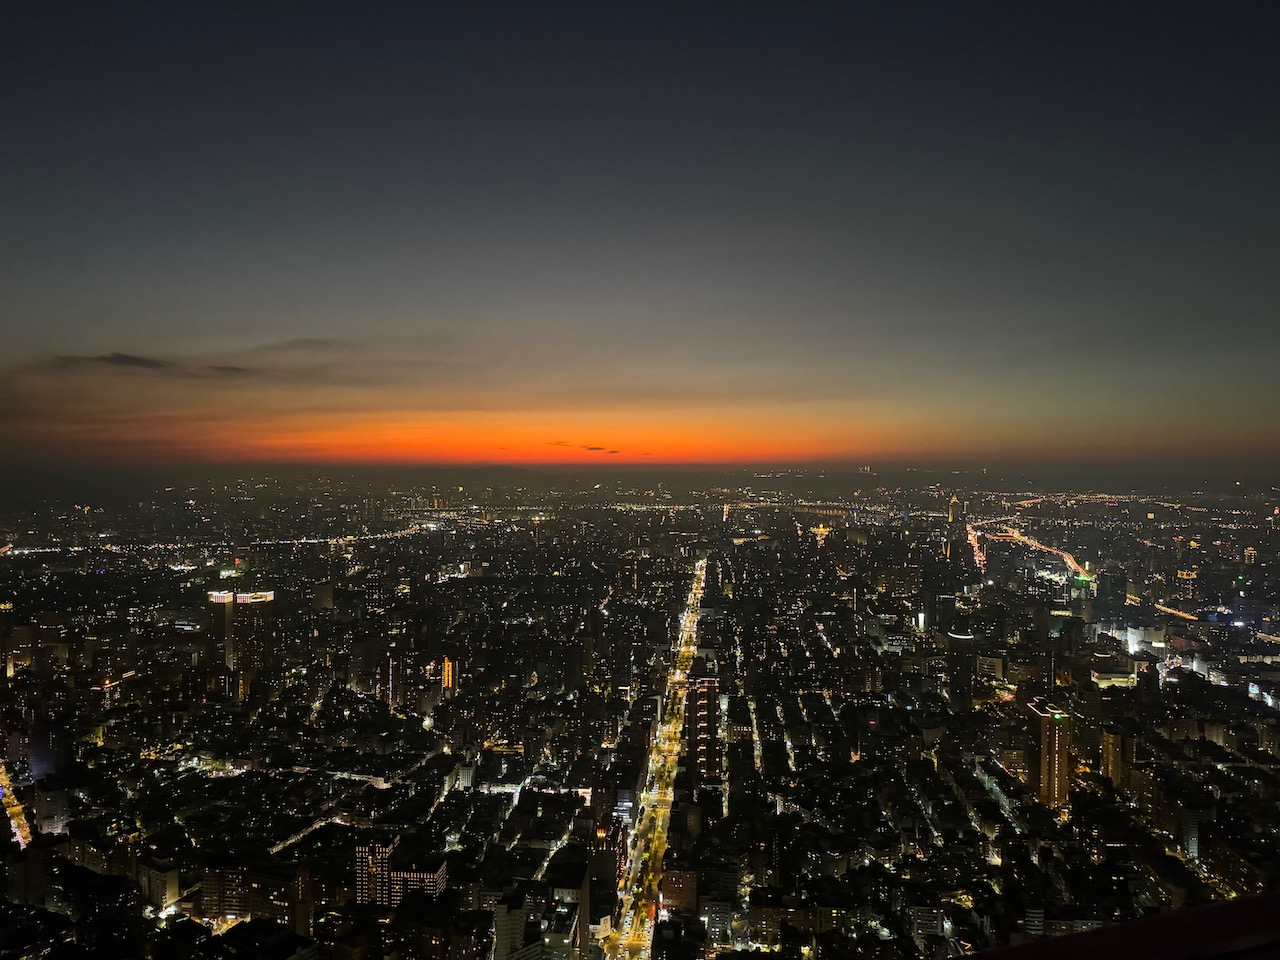 View from Taipei 101 after the sun has set